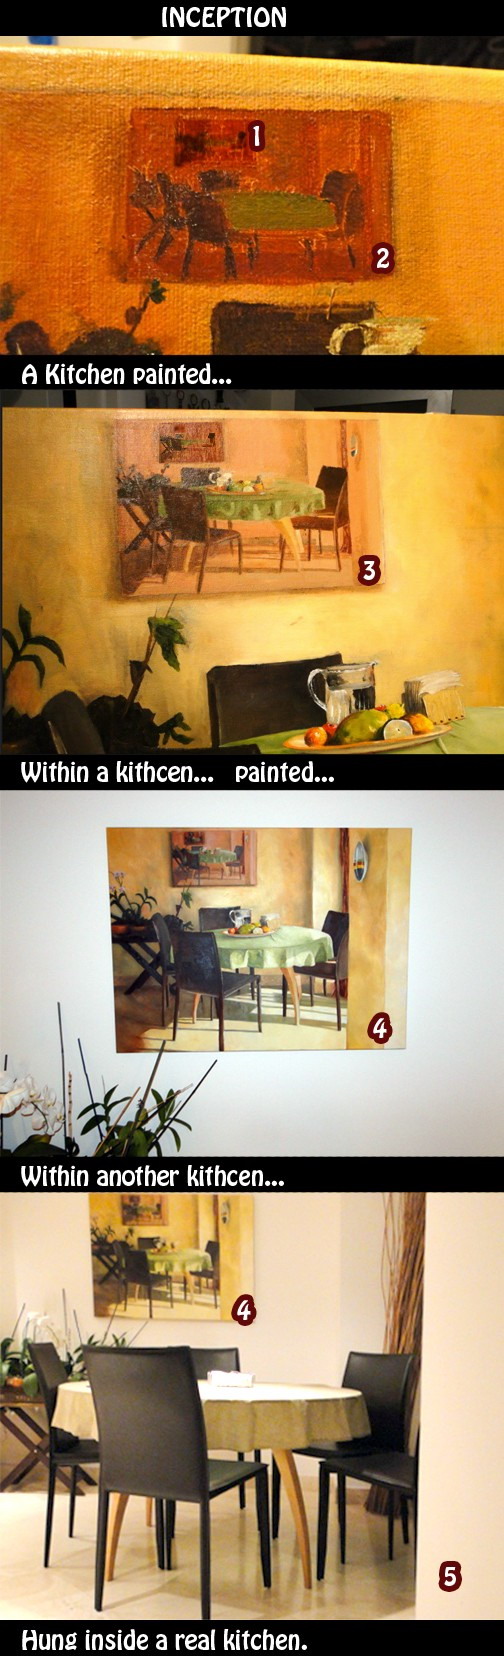 Inception kitchen painting